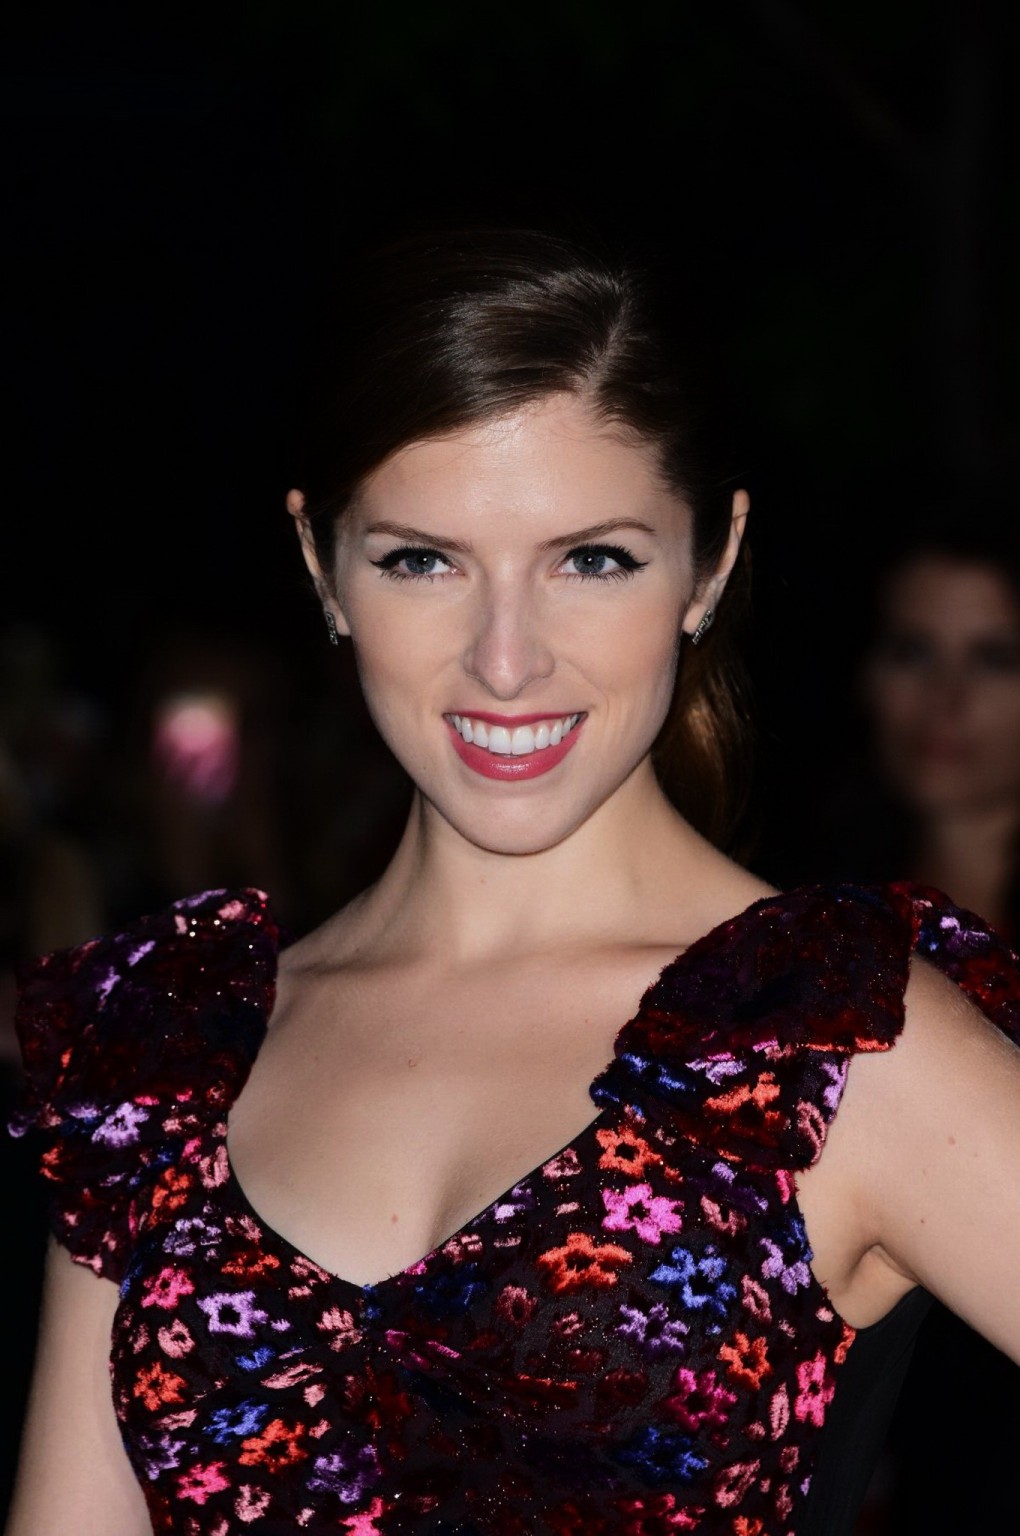 Anna Kendrick cleavy and leggy wearing flower print top and mini skirt at The Vo #75185938